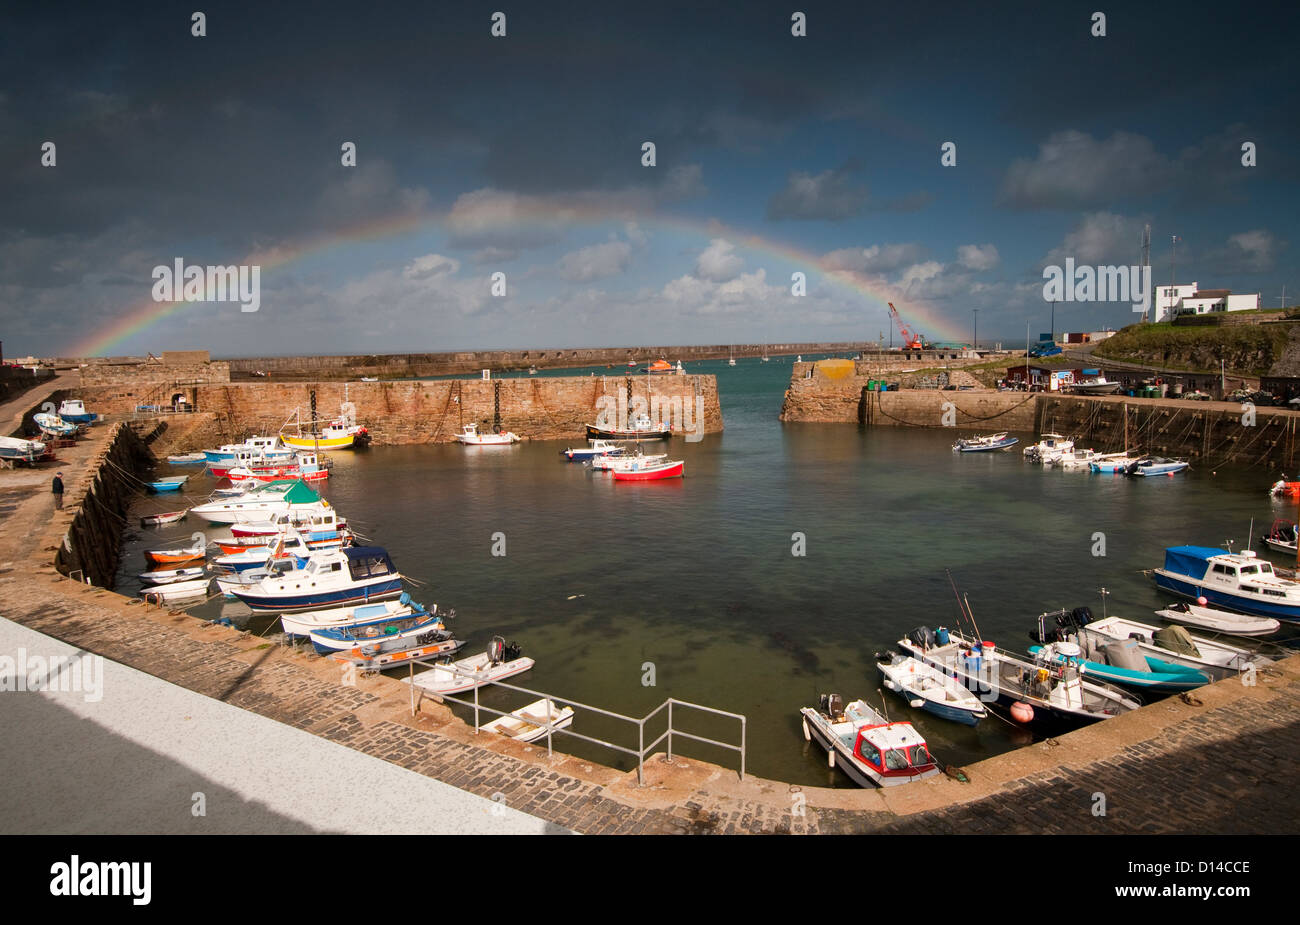 A rainbow over Braye Harbour on Alderney, Channel Islands Stock Photo